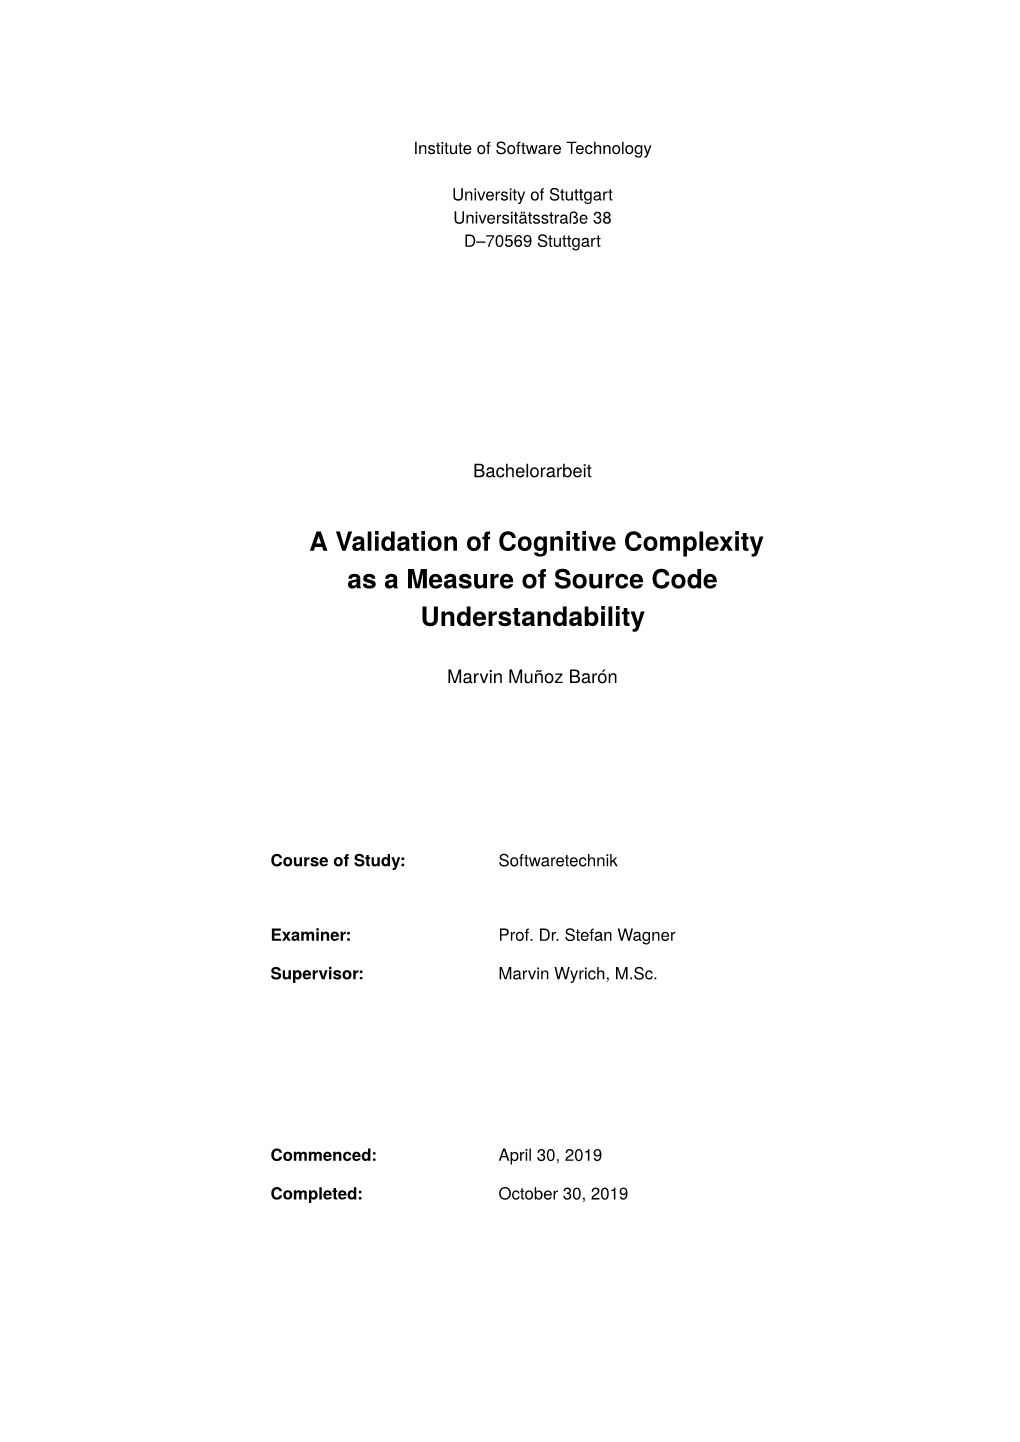 A Validation of Cognitive Complexity As a Measure of Source Code Understandability